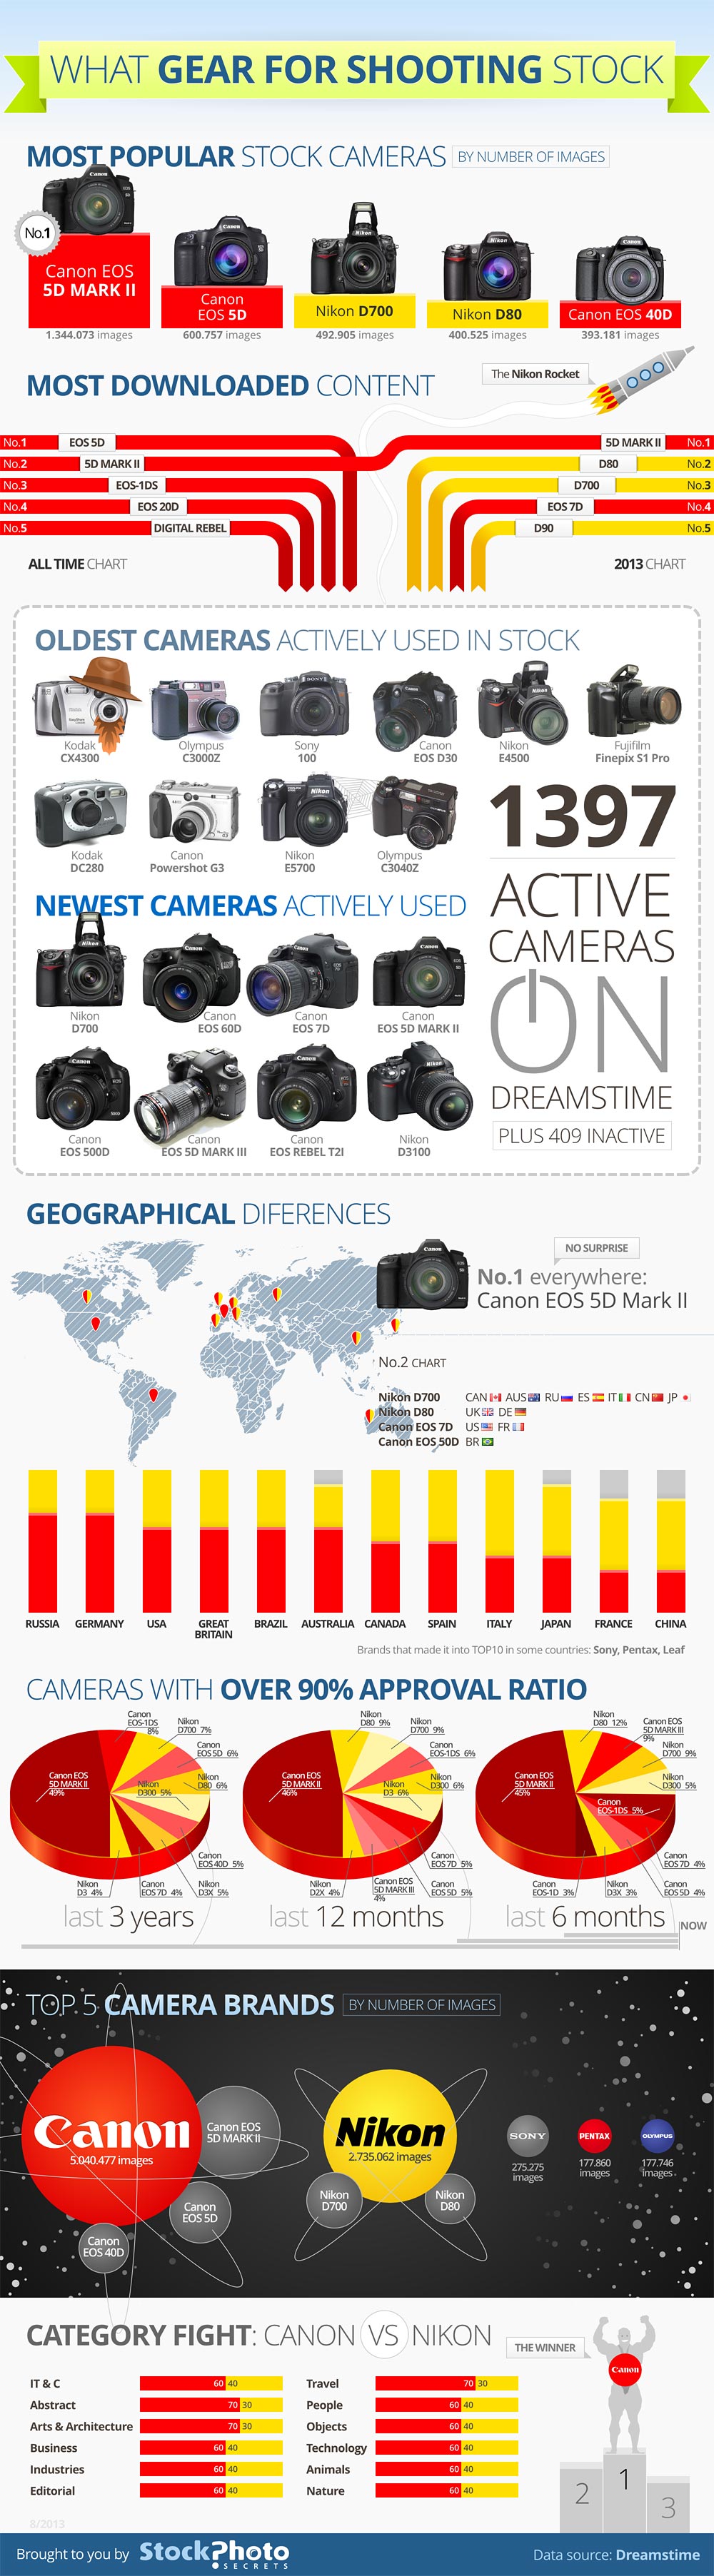 Infographic about Gear from over 157,000 Contributors and over 17,500,000 Stock Photos